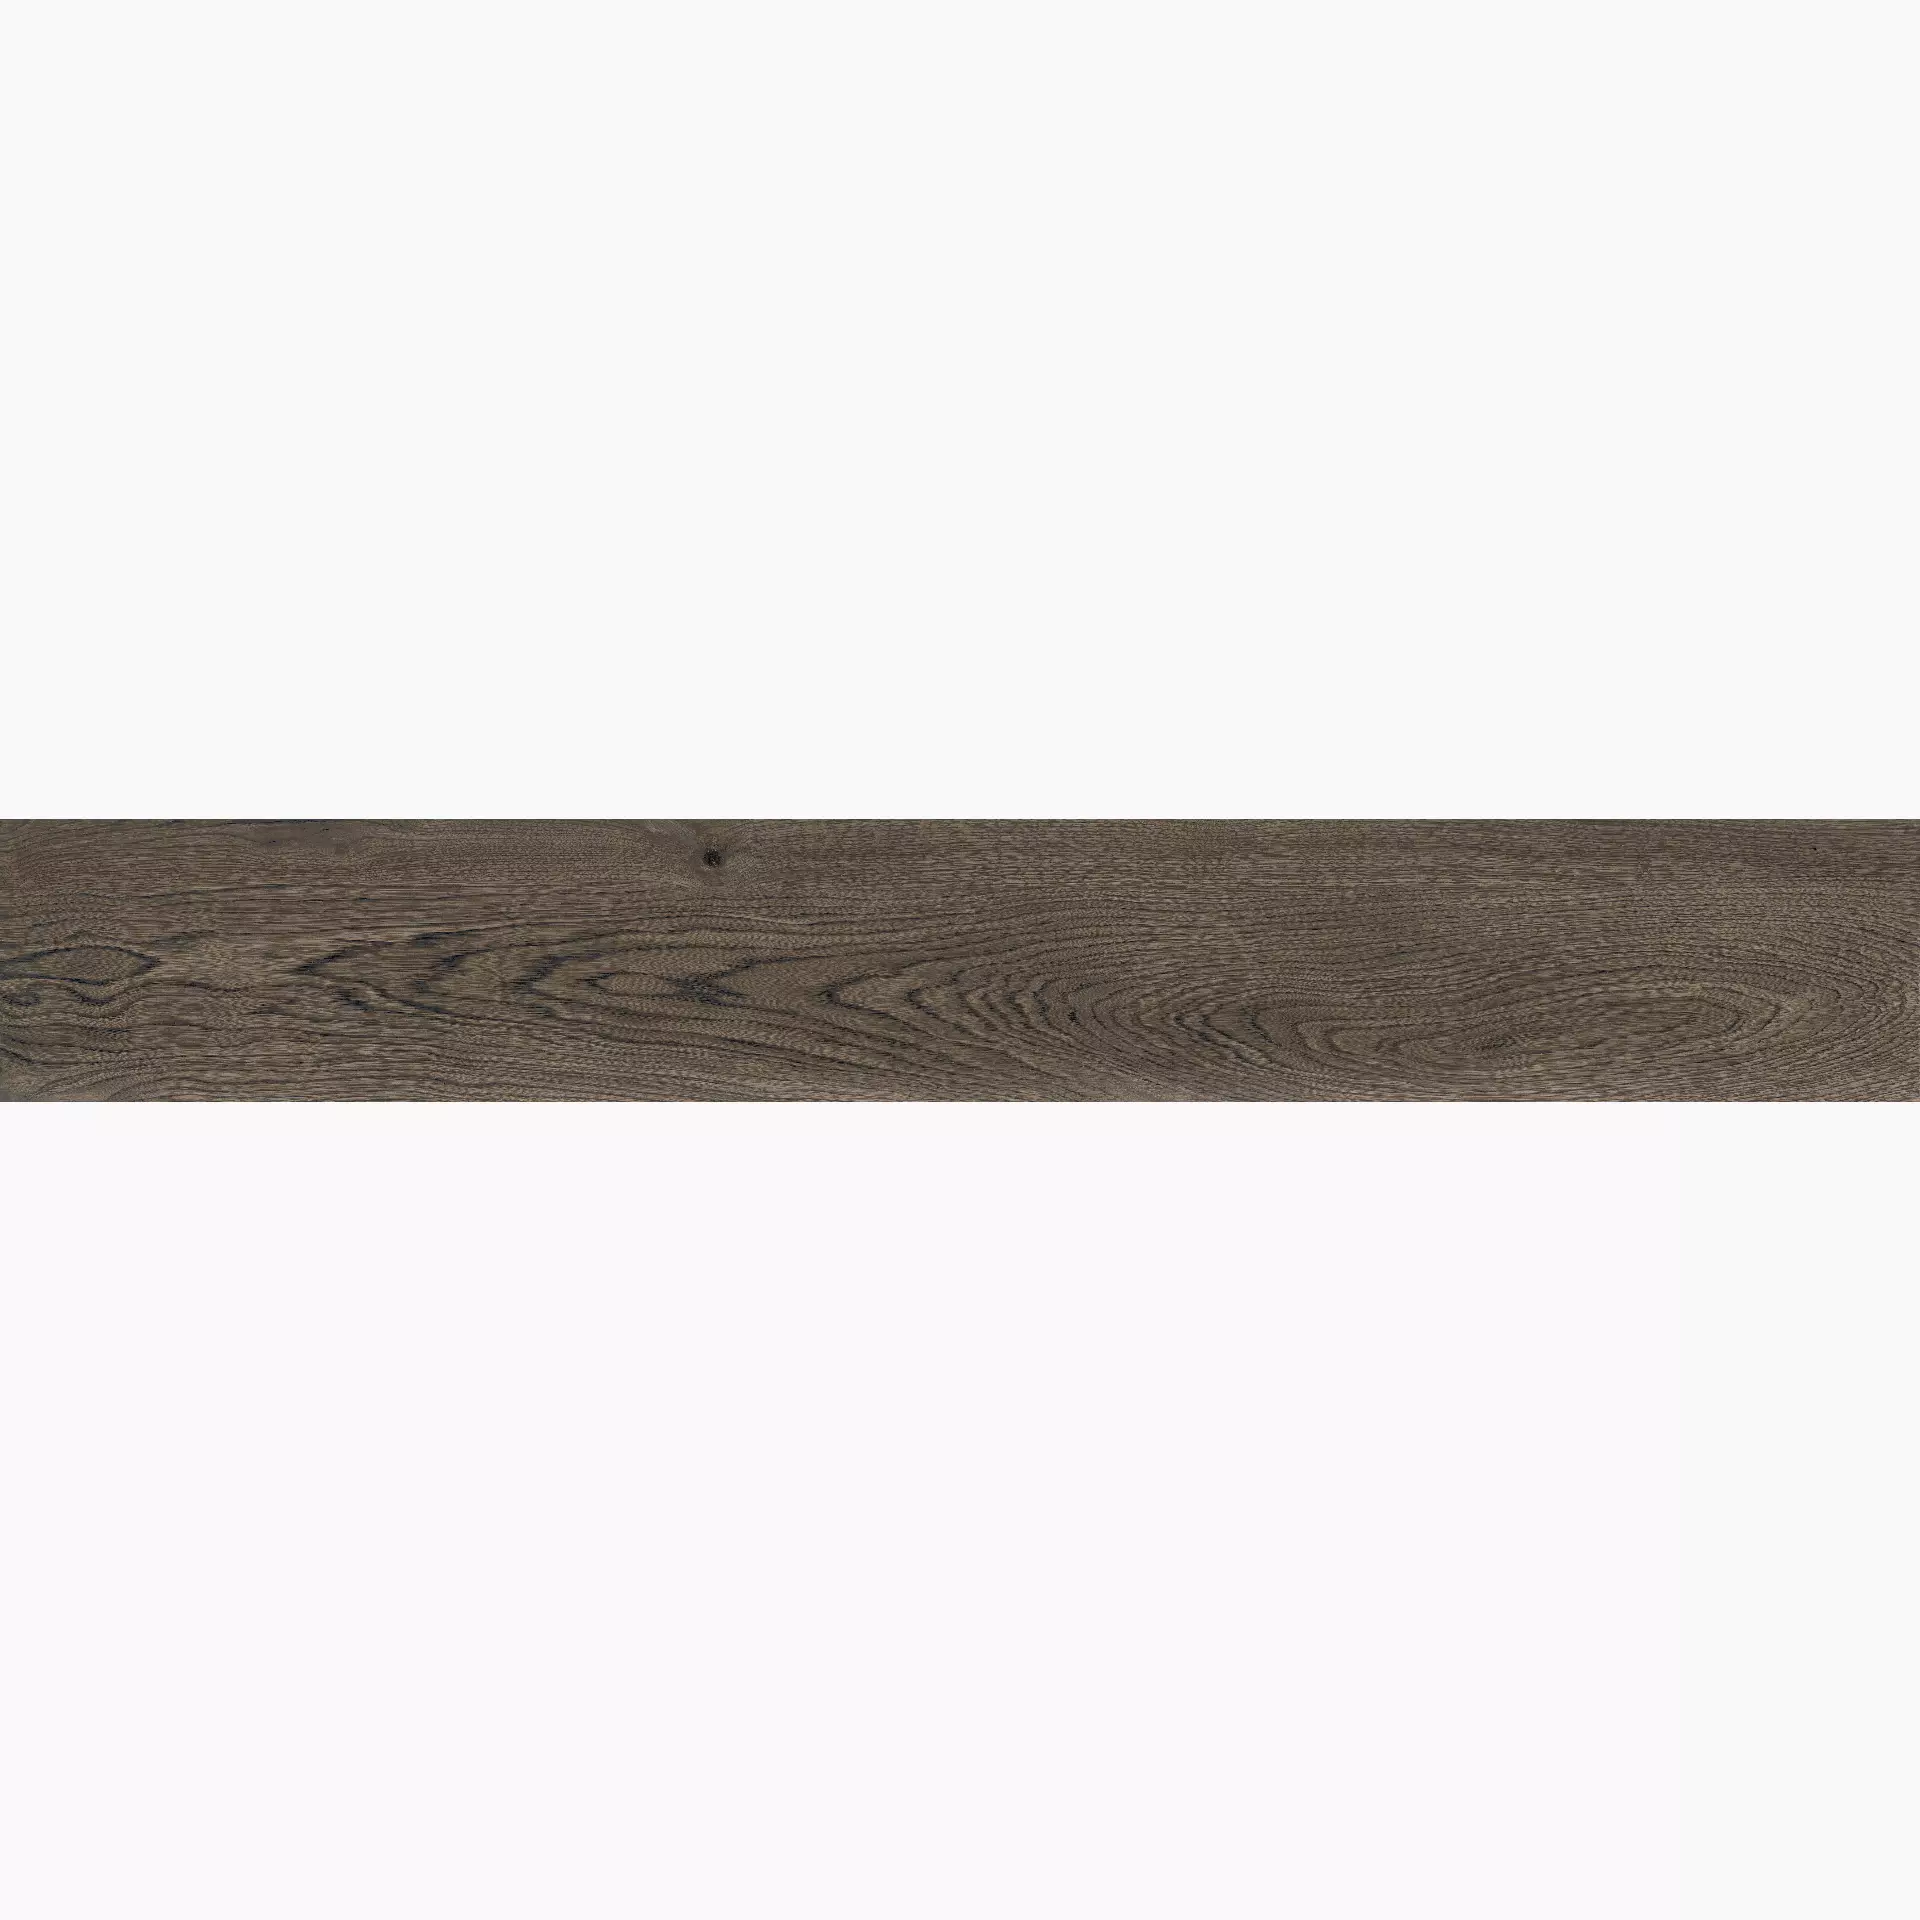 ABK Poetry Wood Mud Naturale PF60010057 26,5x180cm rectified 8,5mm